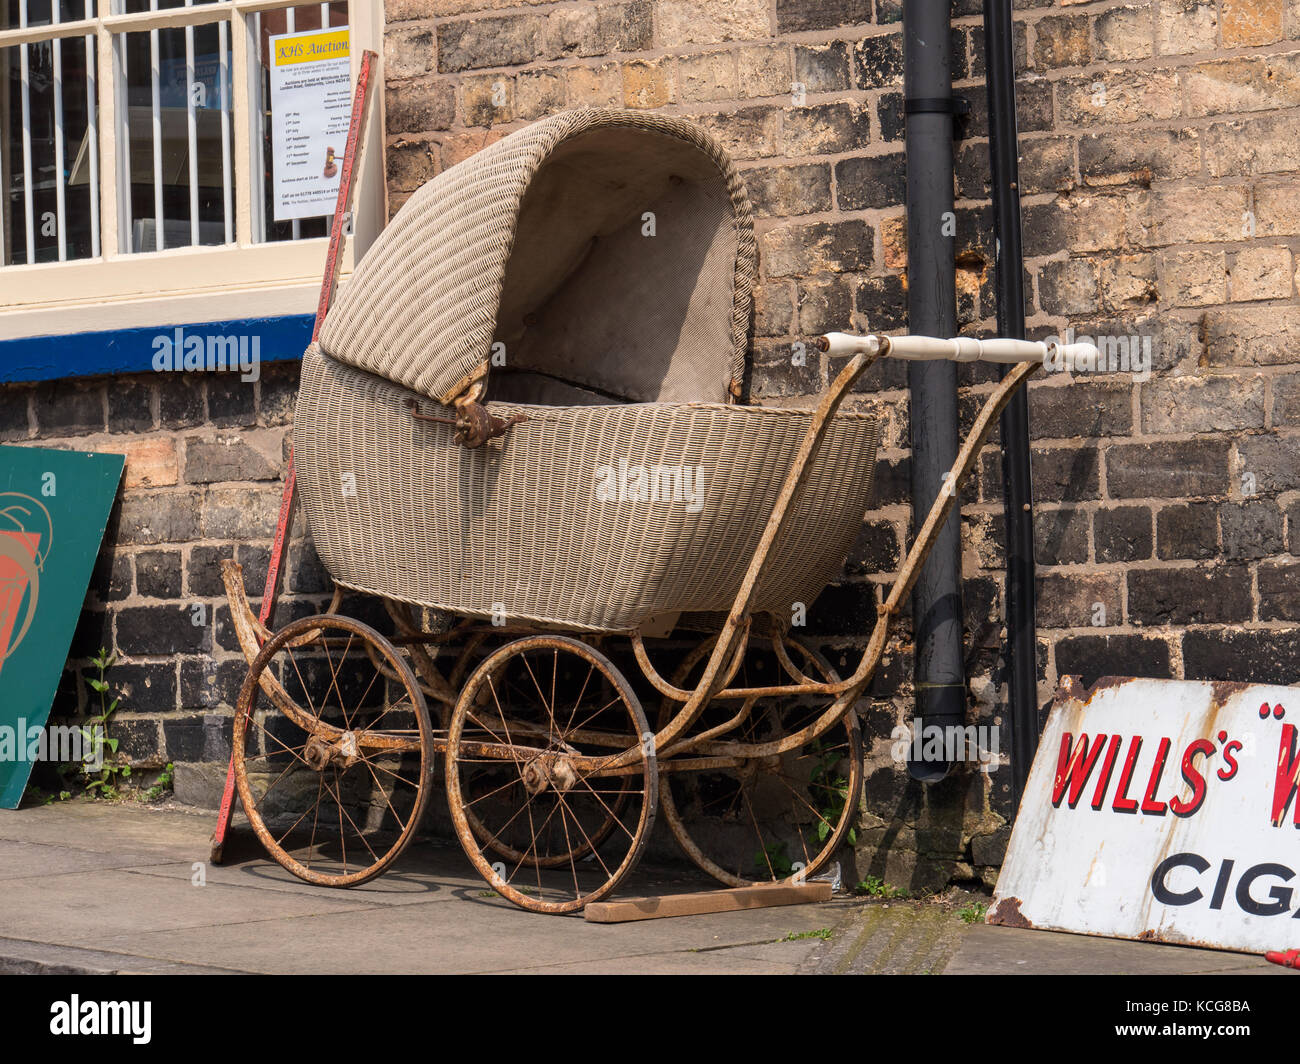 An old pram outside Antiques Shop Steep Hill Lincoln Lincolnshire England Stock Photo